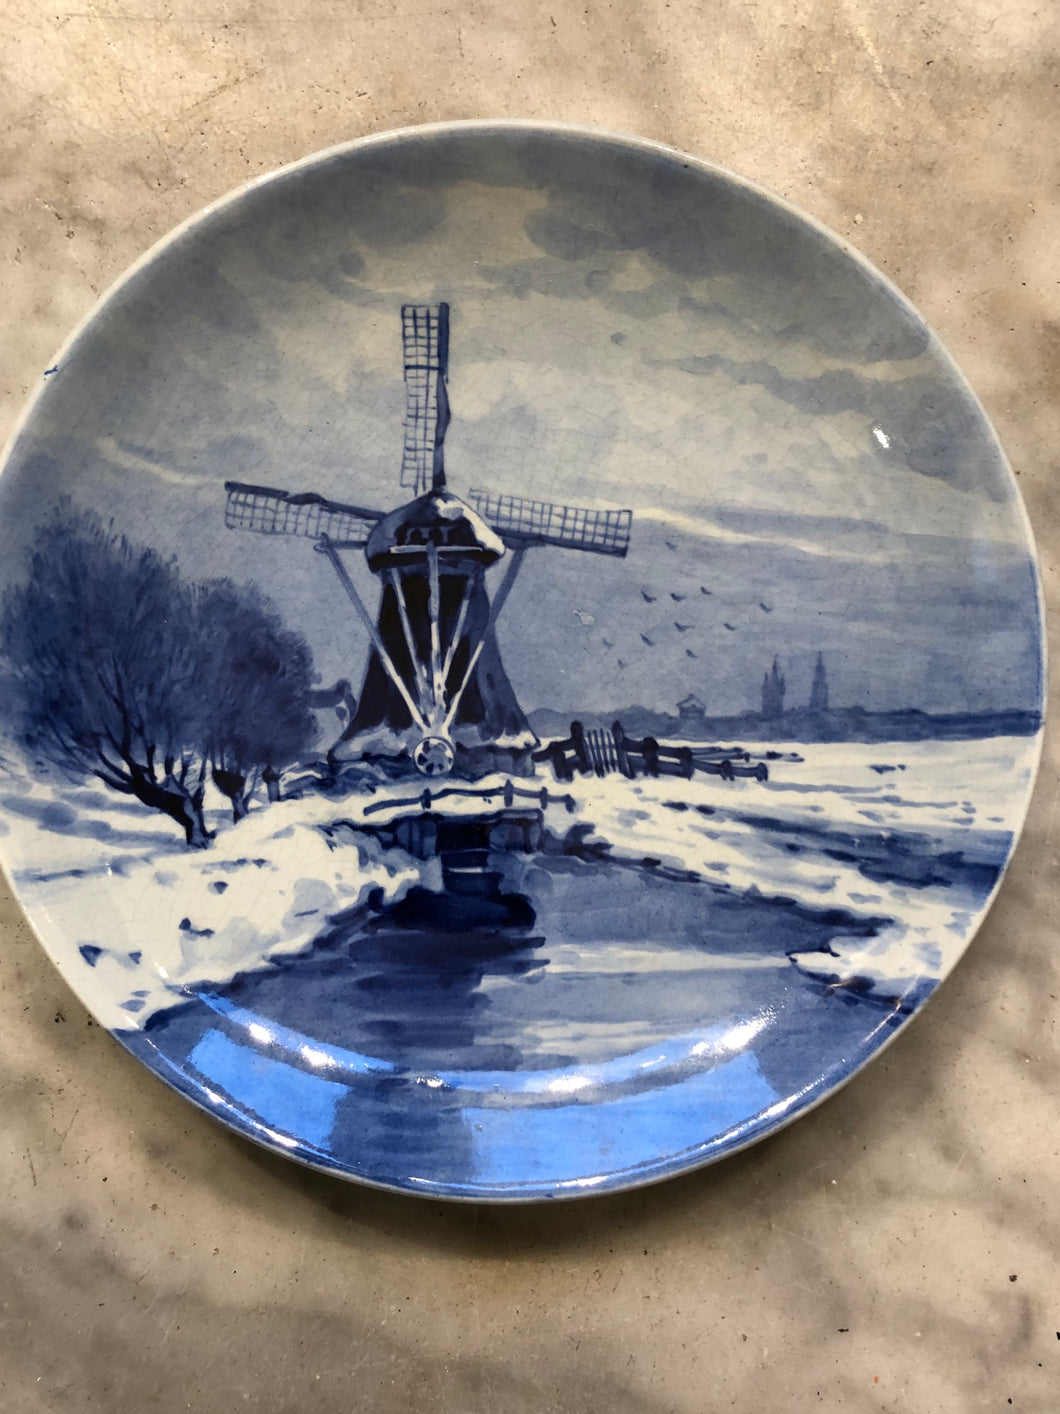 Royal Delft handpainted dutch plate with windmill